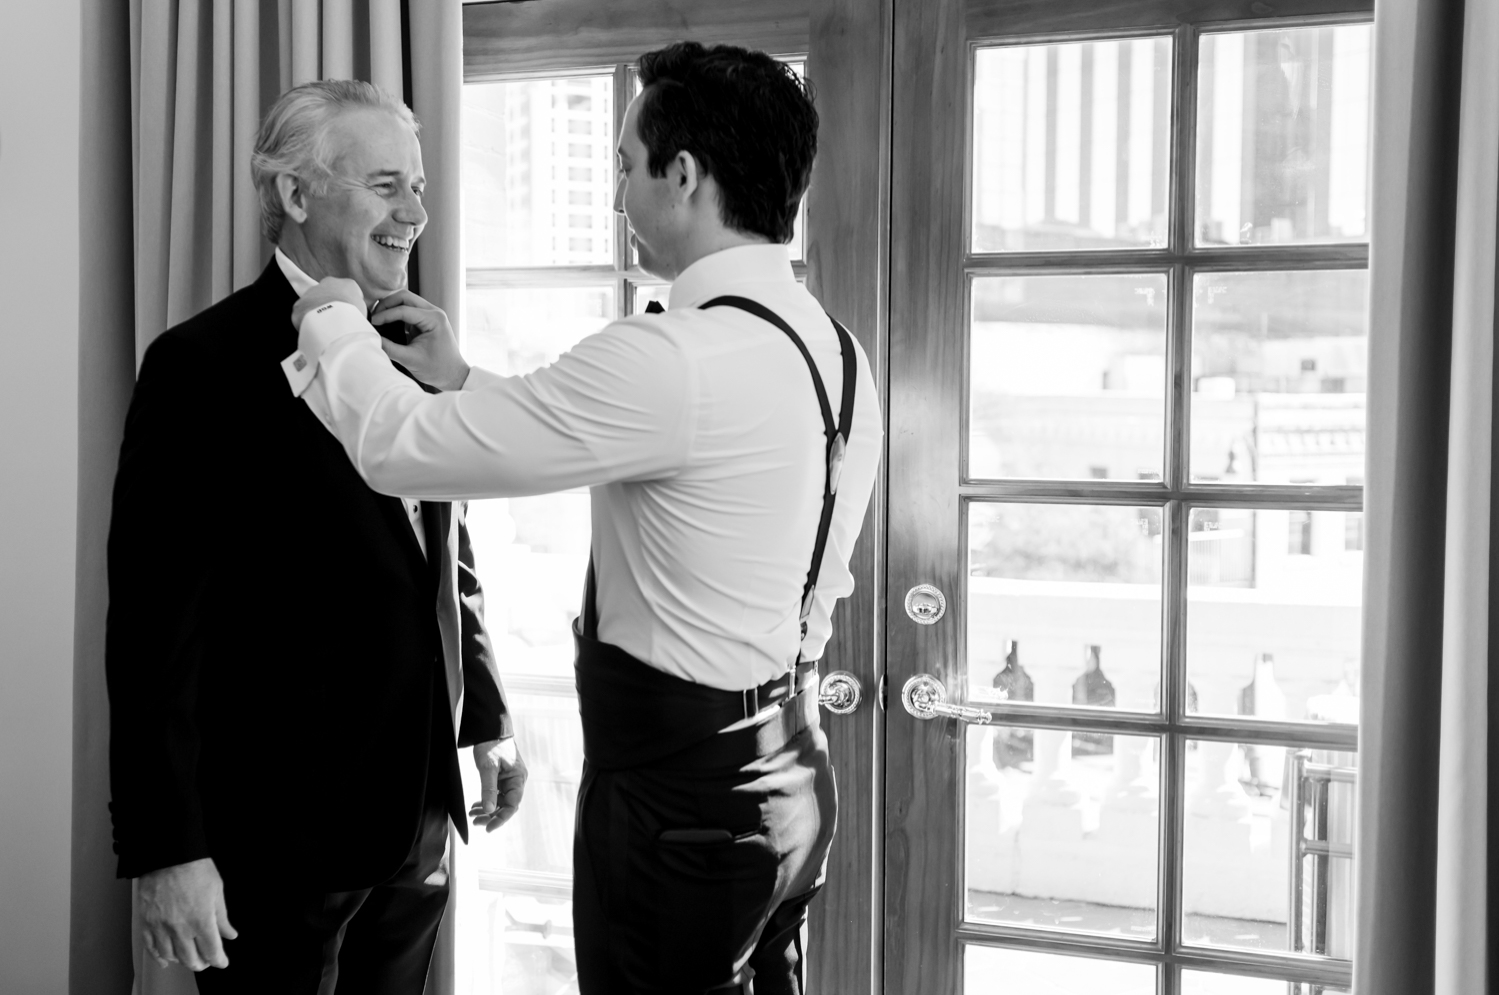 The groom adjusts his father's bow tie before the wedding